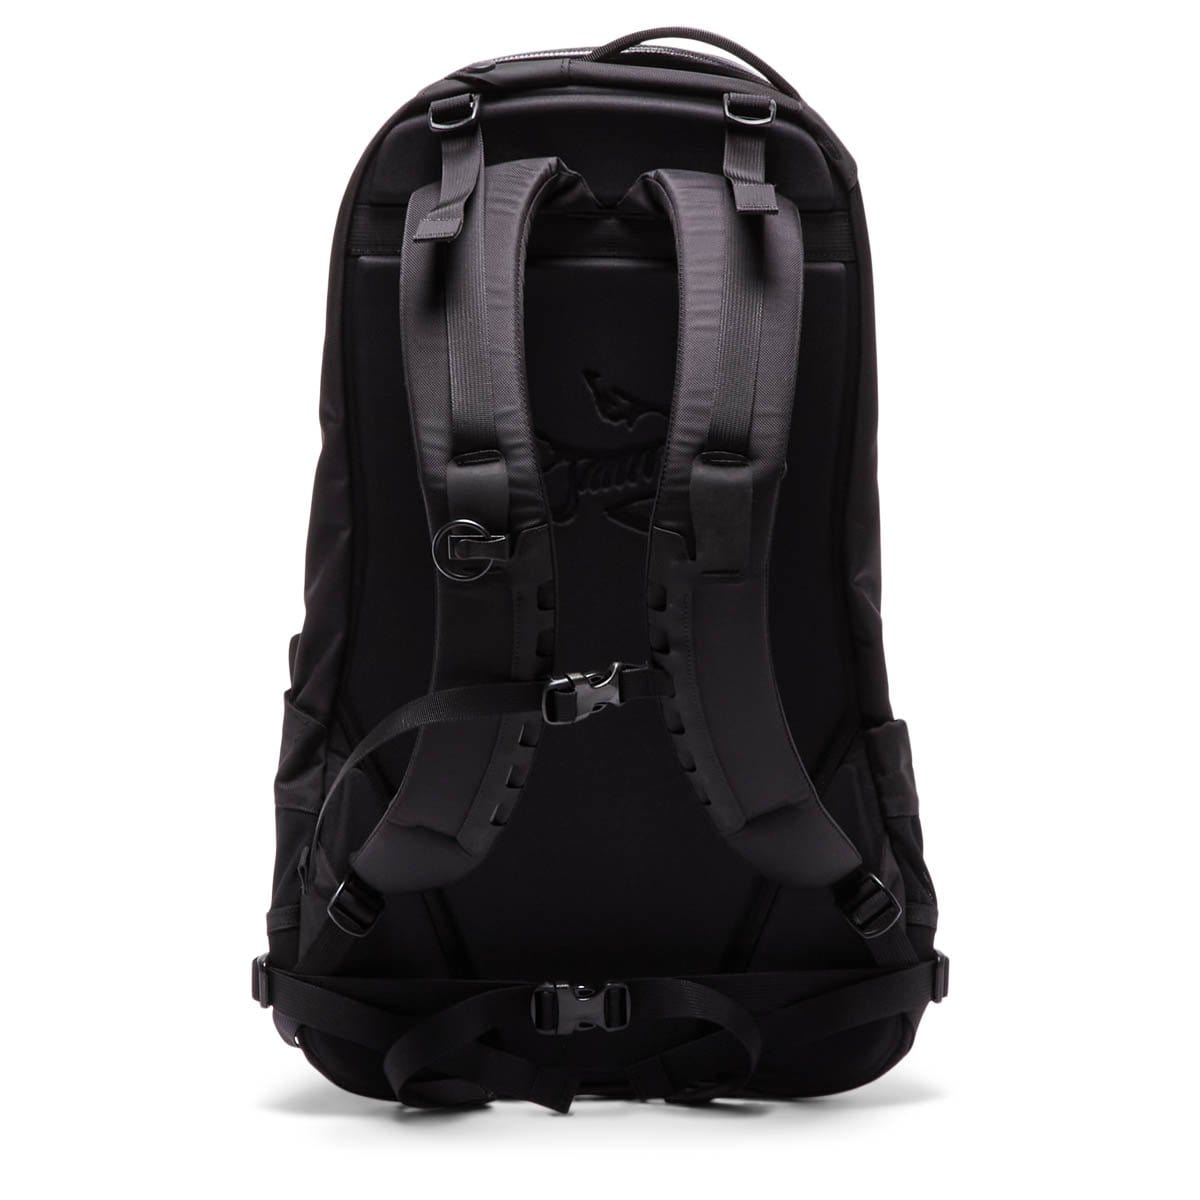 Arc'teryx Bags & Accessories STEALTH BLACK / OS ARRO 22 BACKPACK